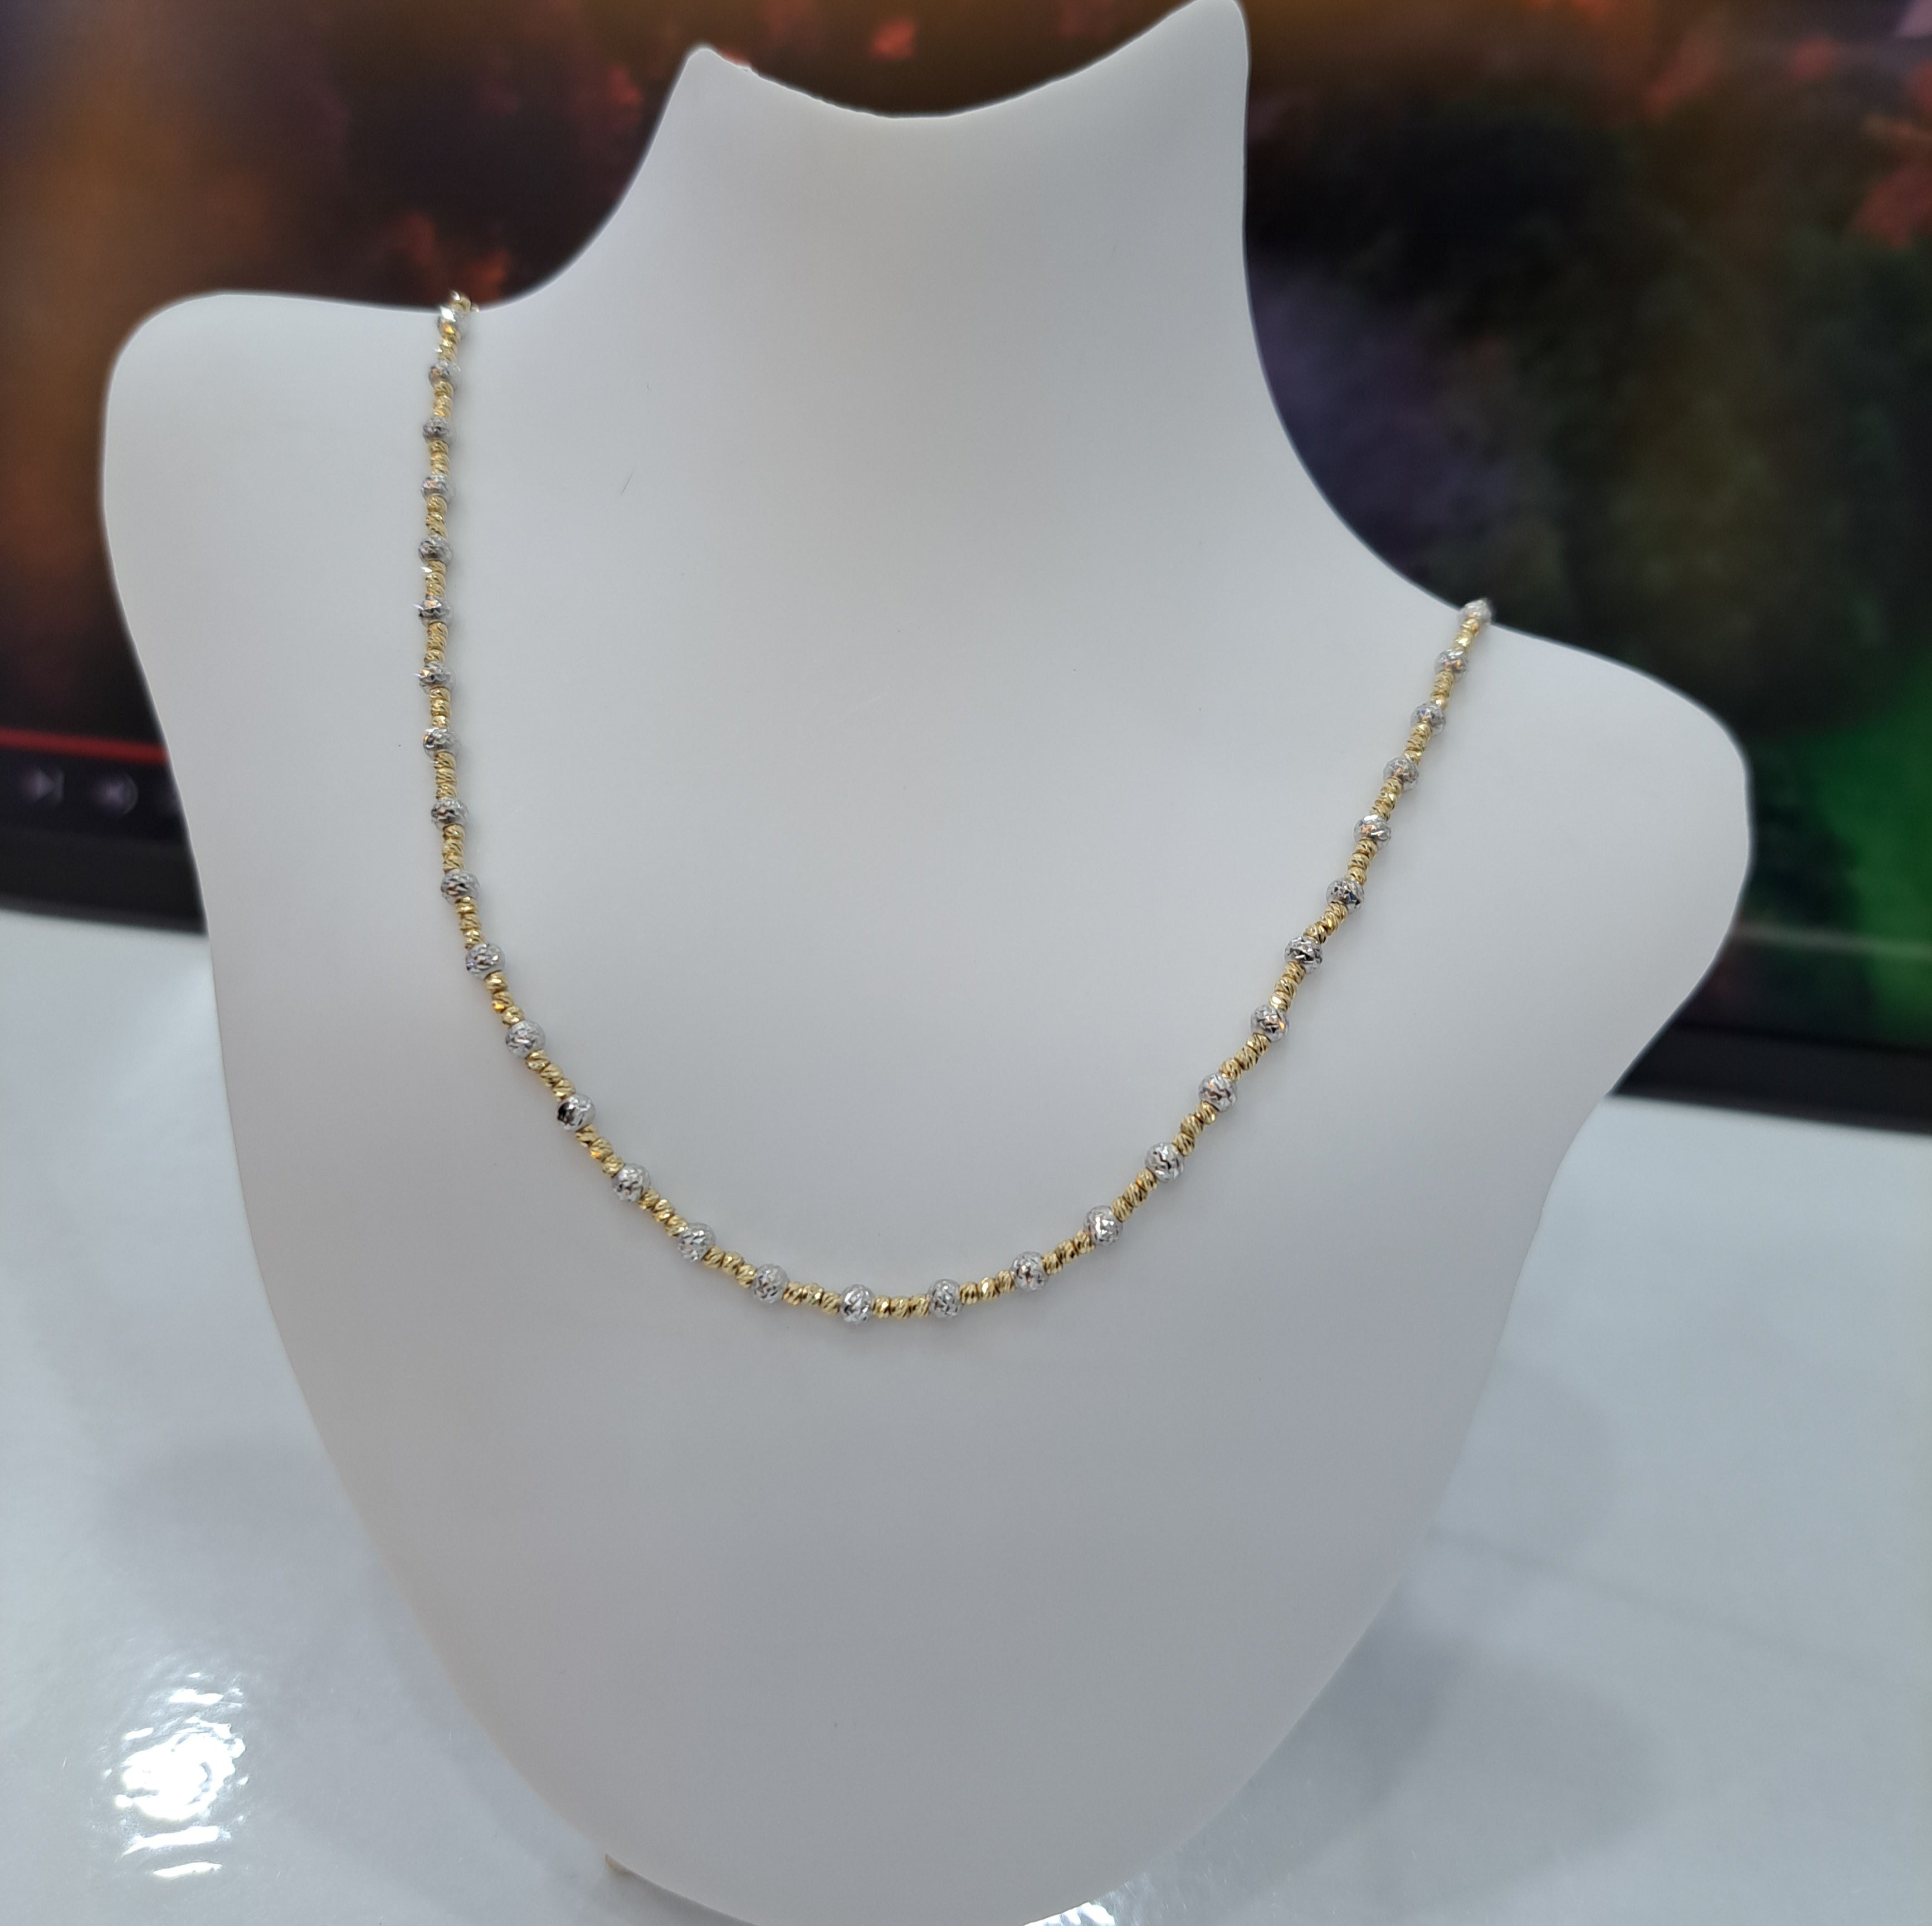 750 gold two tones Italian Chain Necklace